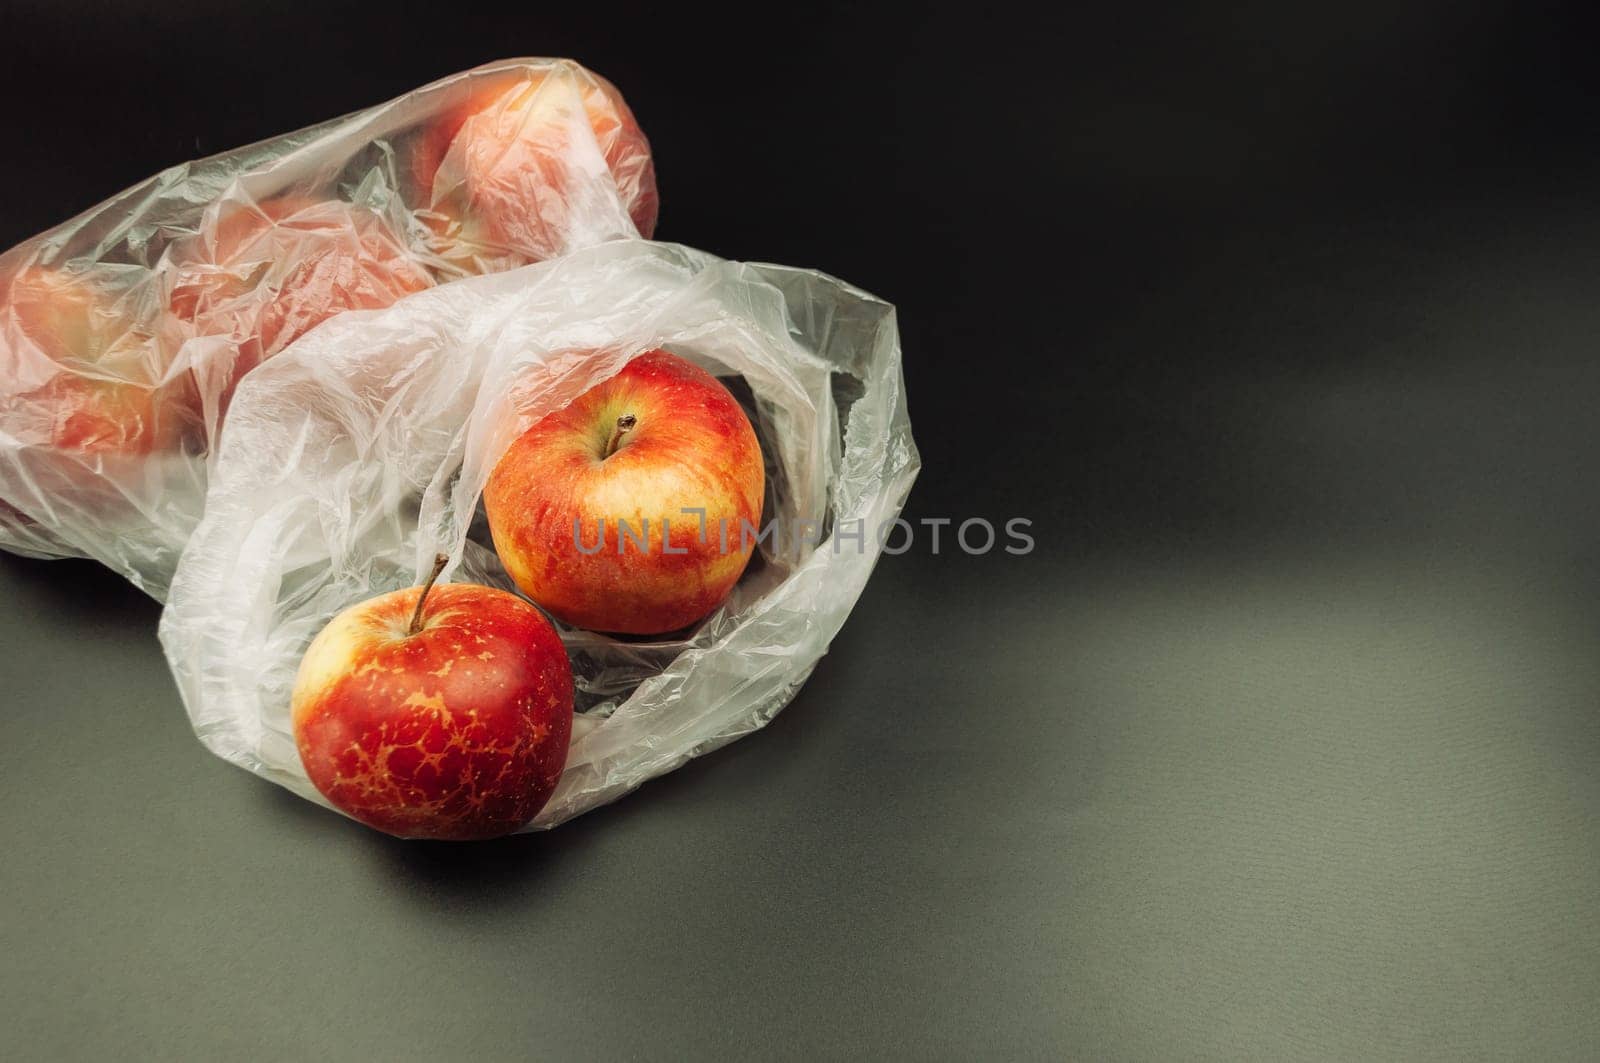 A bag of apples is sitting on a black background. The apples are red and have a few brown spots. The bag is made of plastic and is open